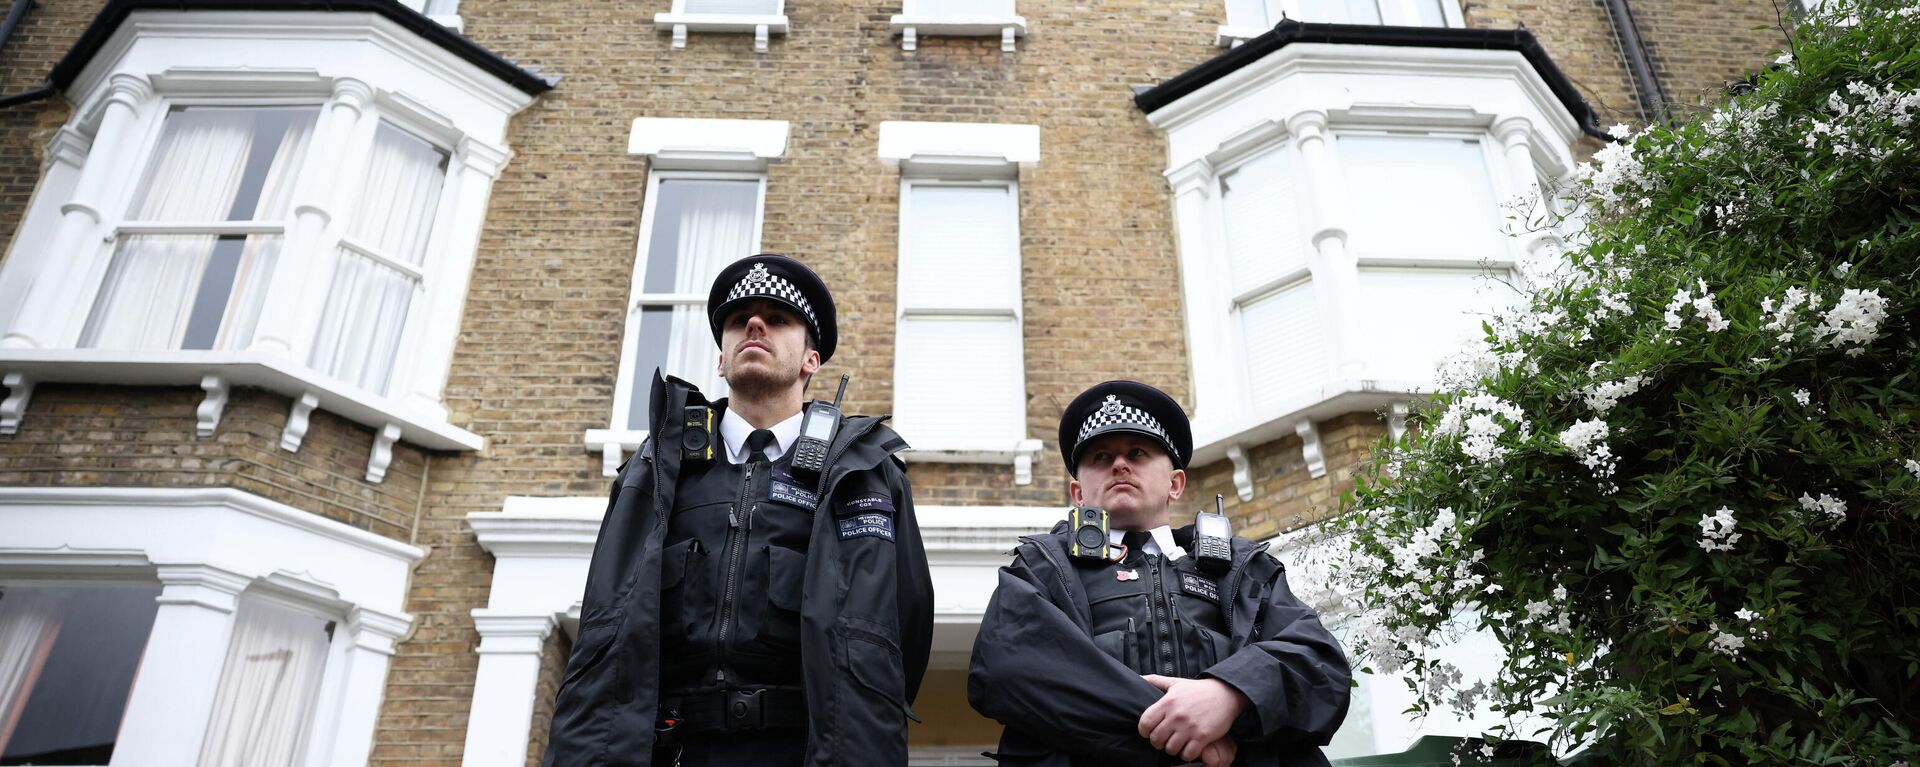 Police stand guard outside house believed to be address belonging to man arrested in connection with killing of British MP Amess, in London - Sputnik International, 1920, 17.10.2021